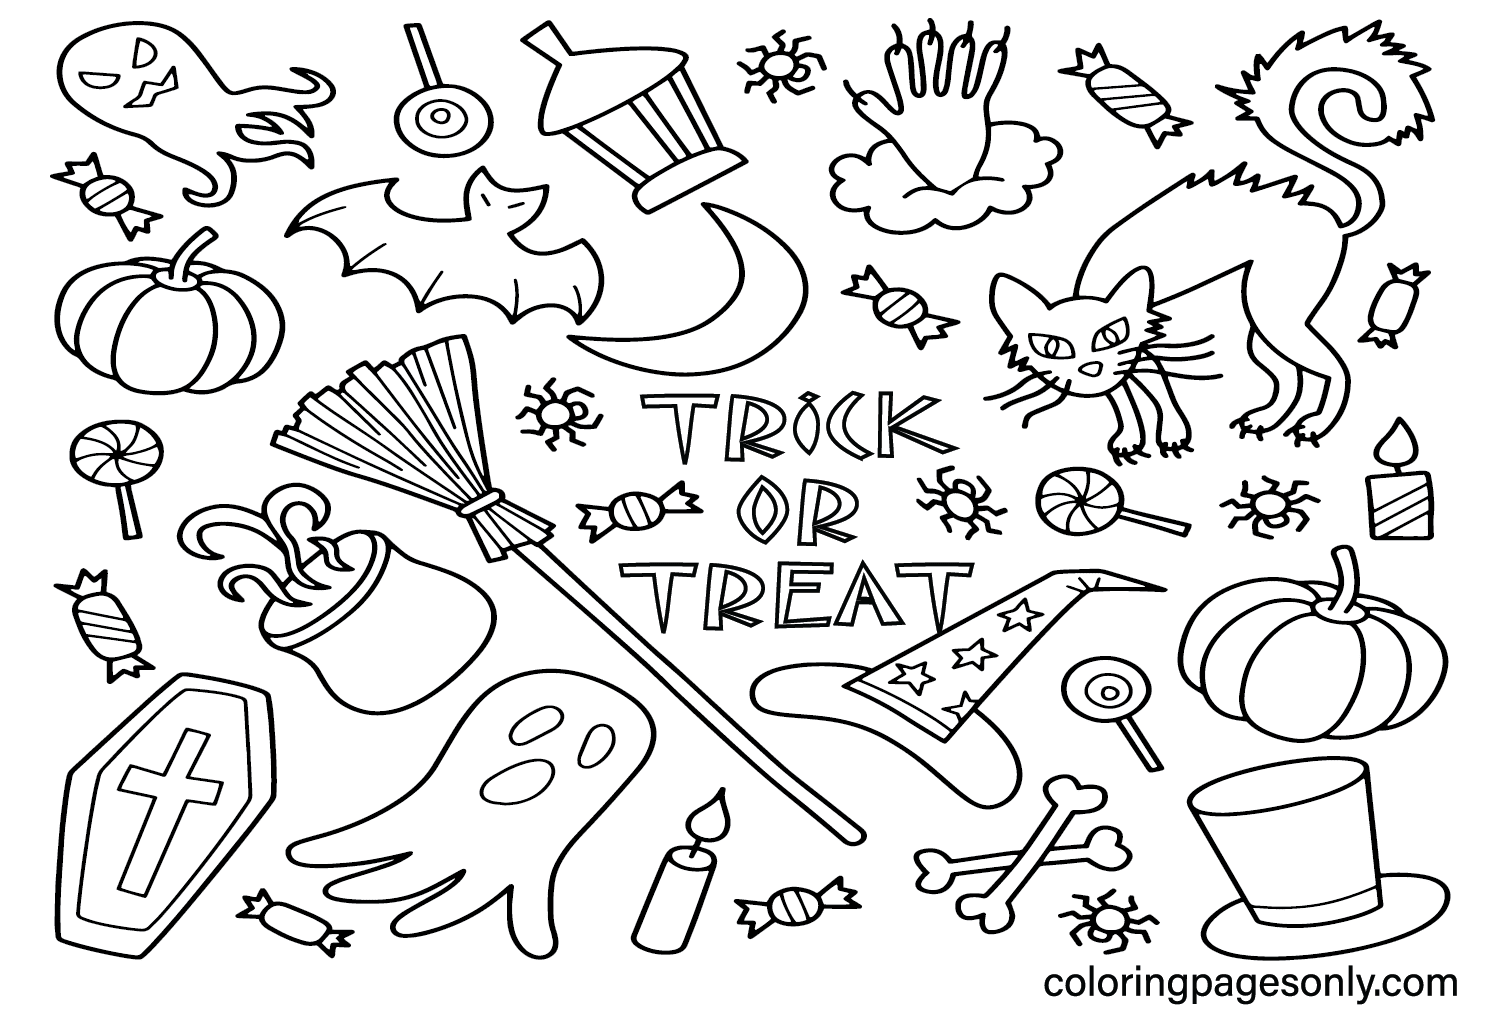 Free Trick or Treat Coloring Page